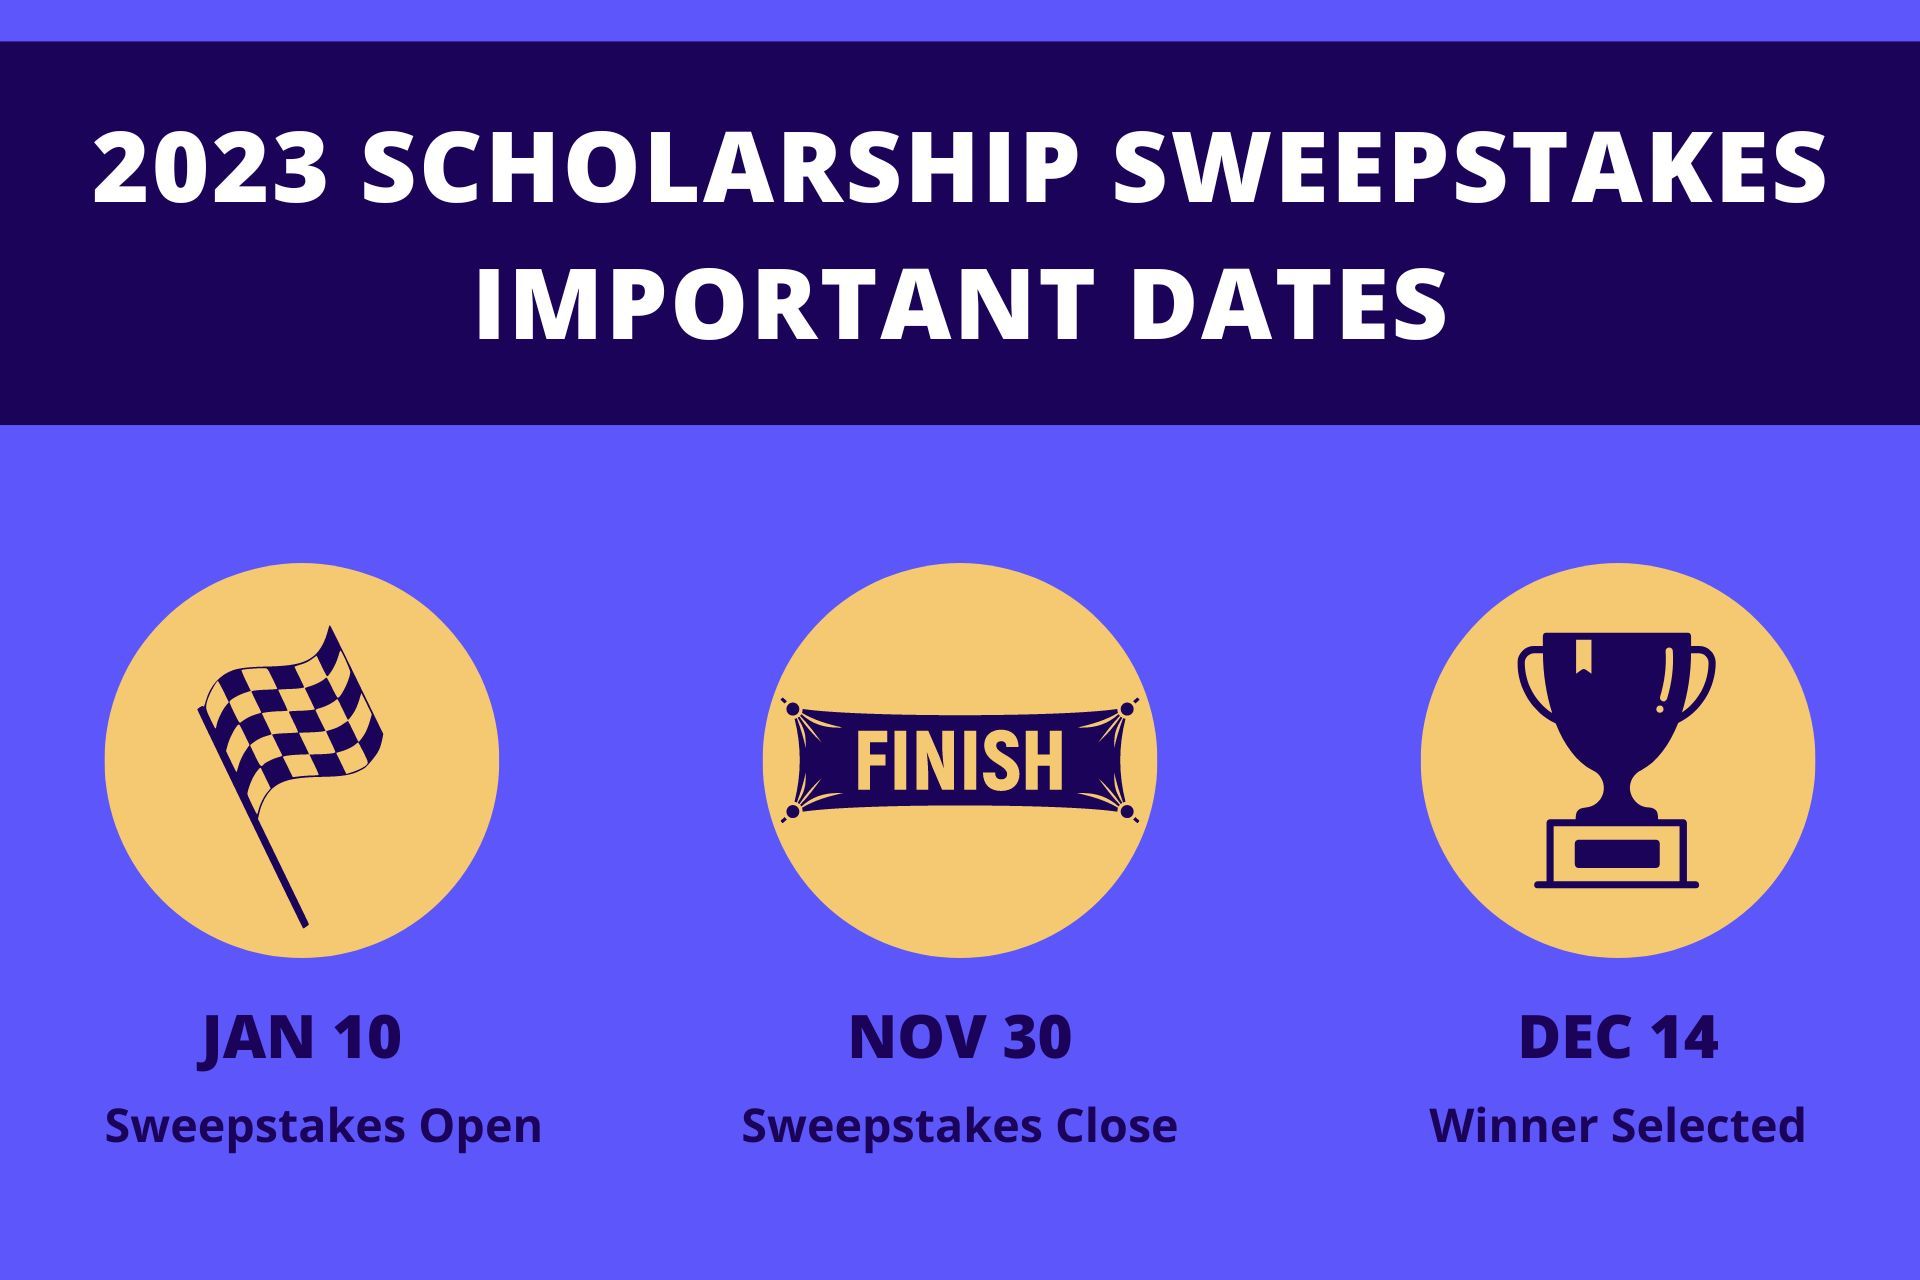 A graphic showing the important dates of Bold.org's Scholarship Sweepstakes